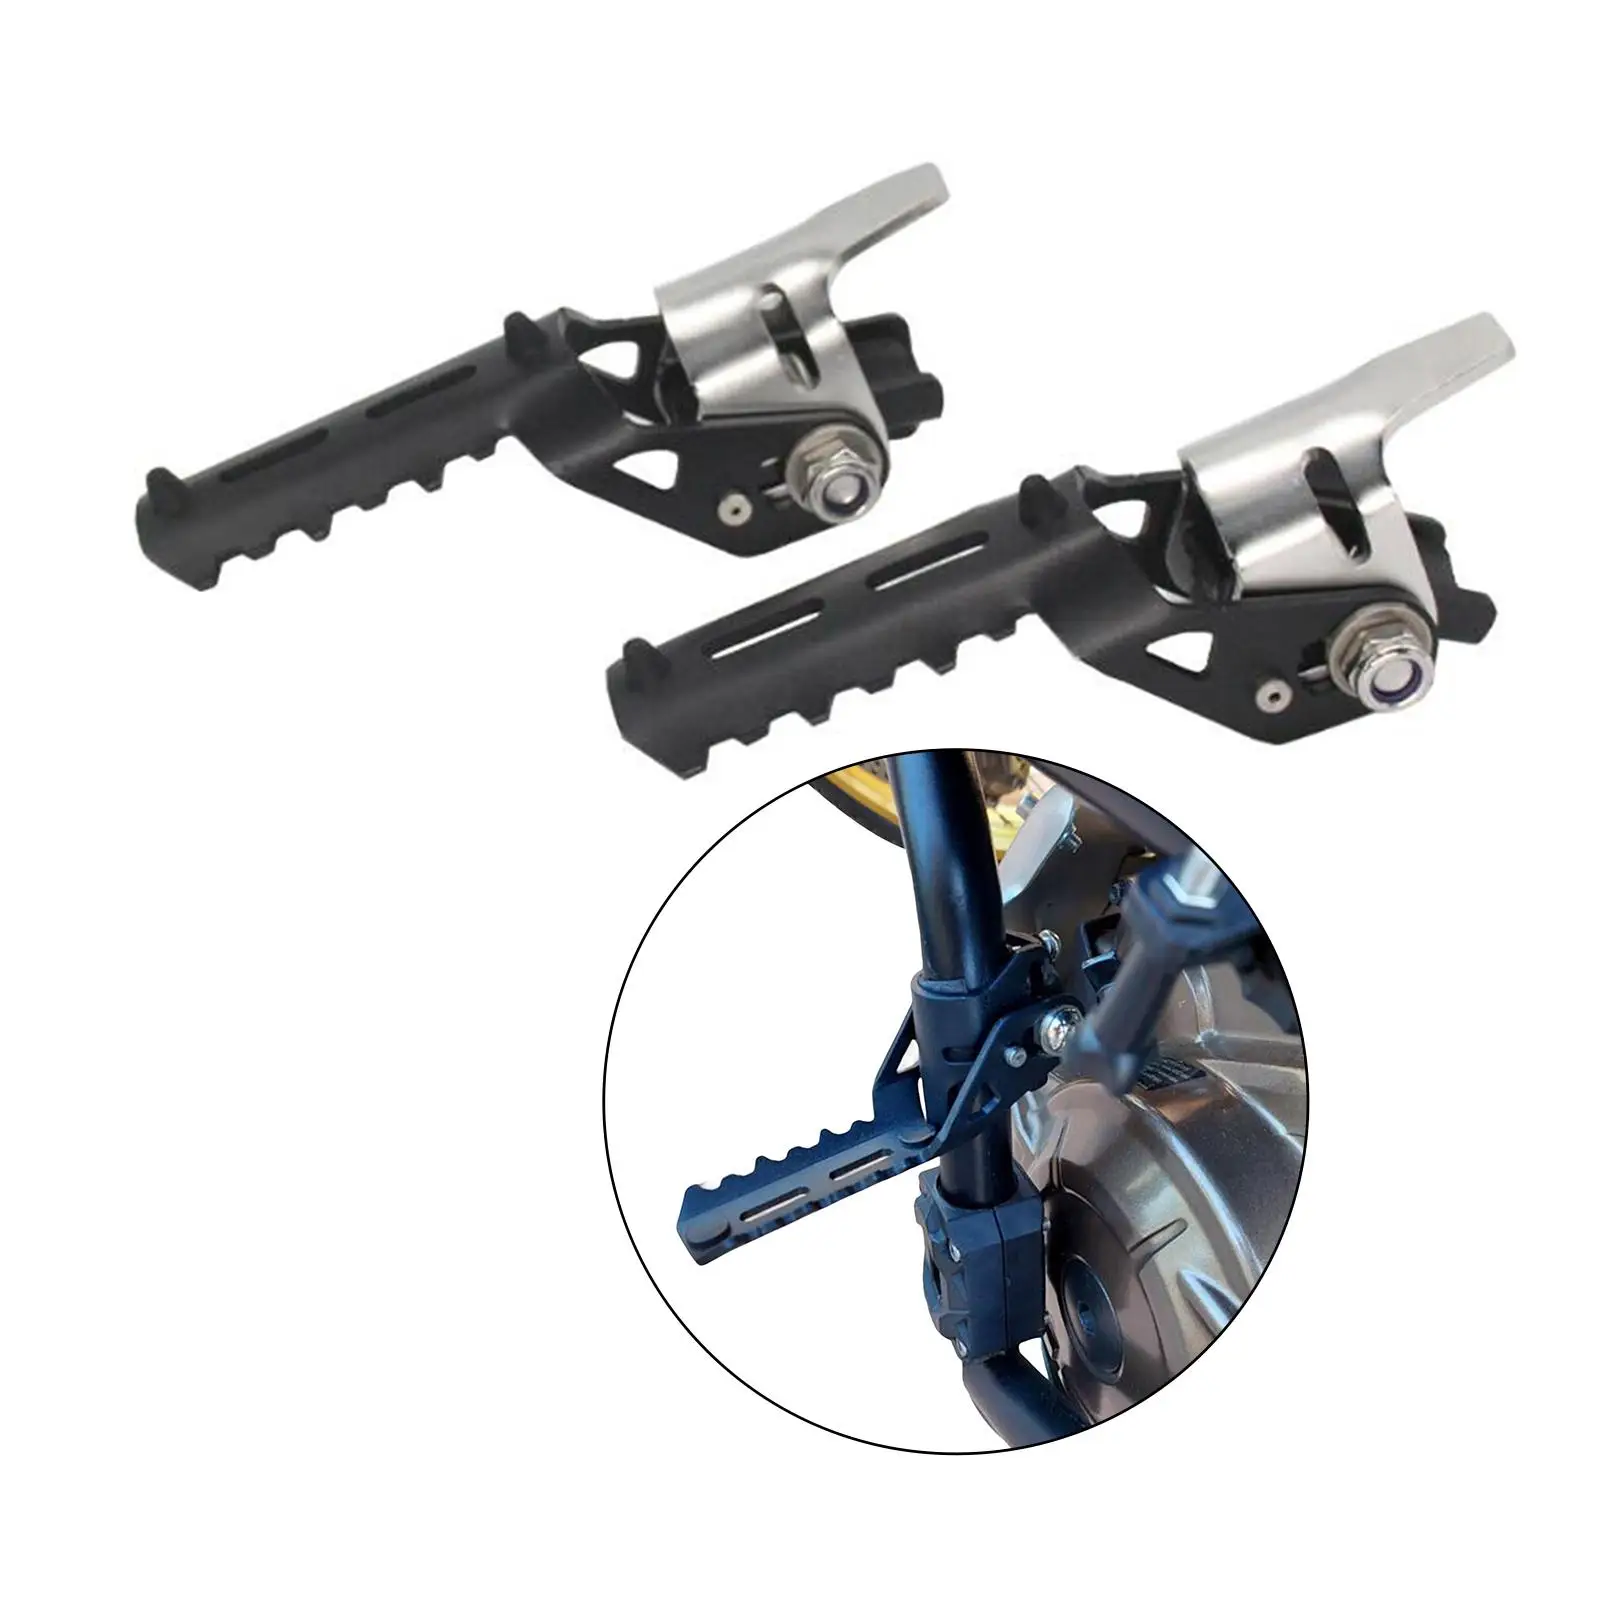 Front Foot Pegs Diameter Tube 22-25mm for BMW R1250GS F850GS C400x